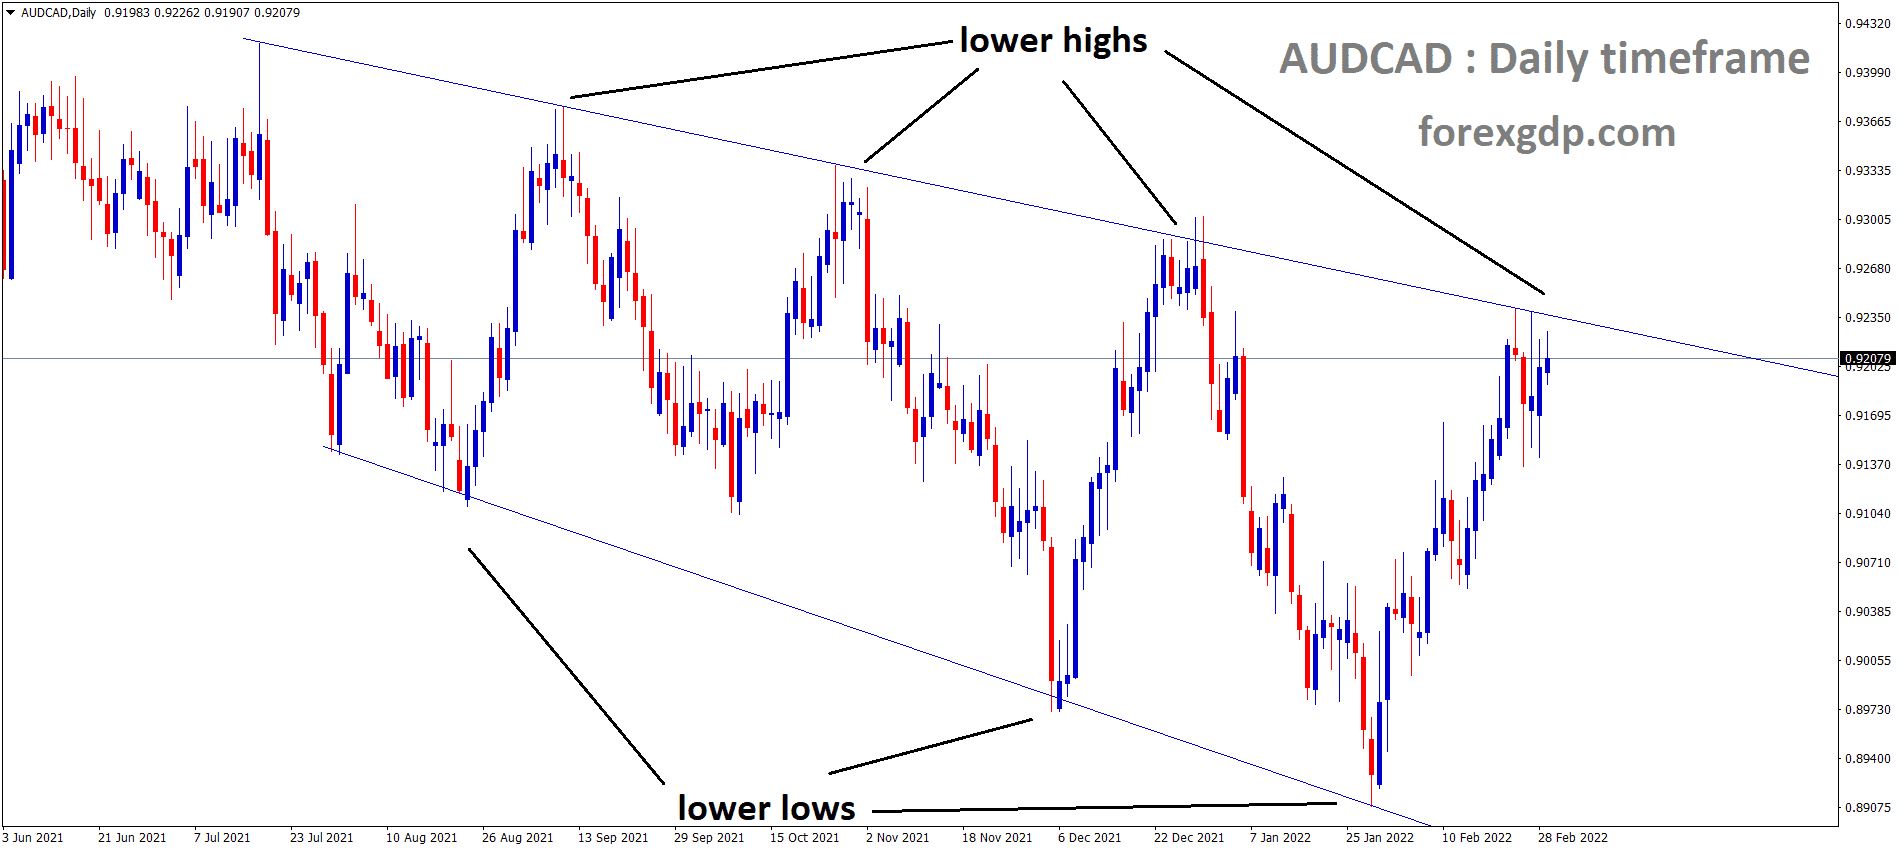 AUDCAD is moving in the Descending channel and the market has reached the lower high area of the Channel